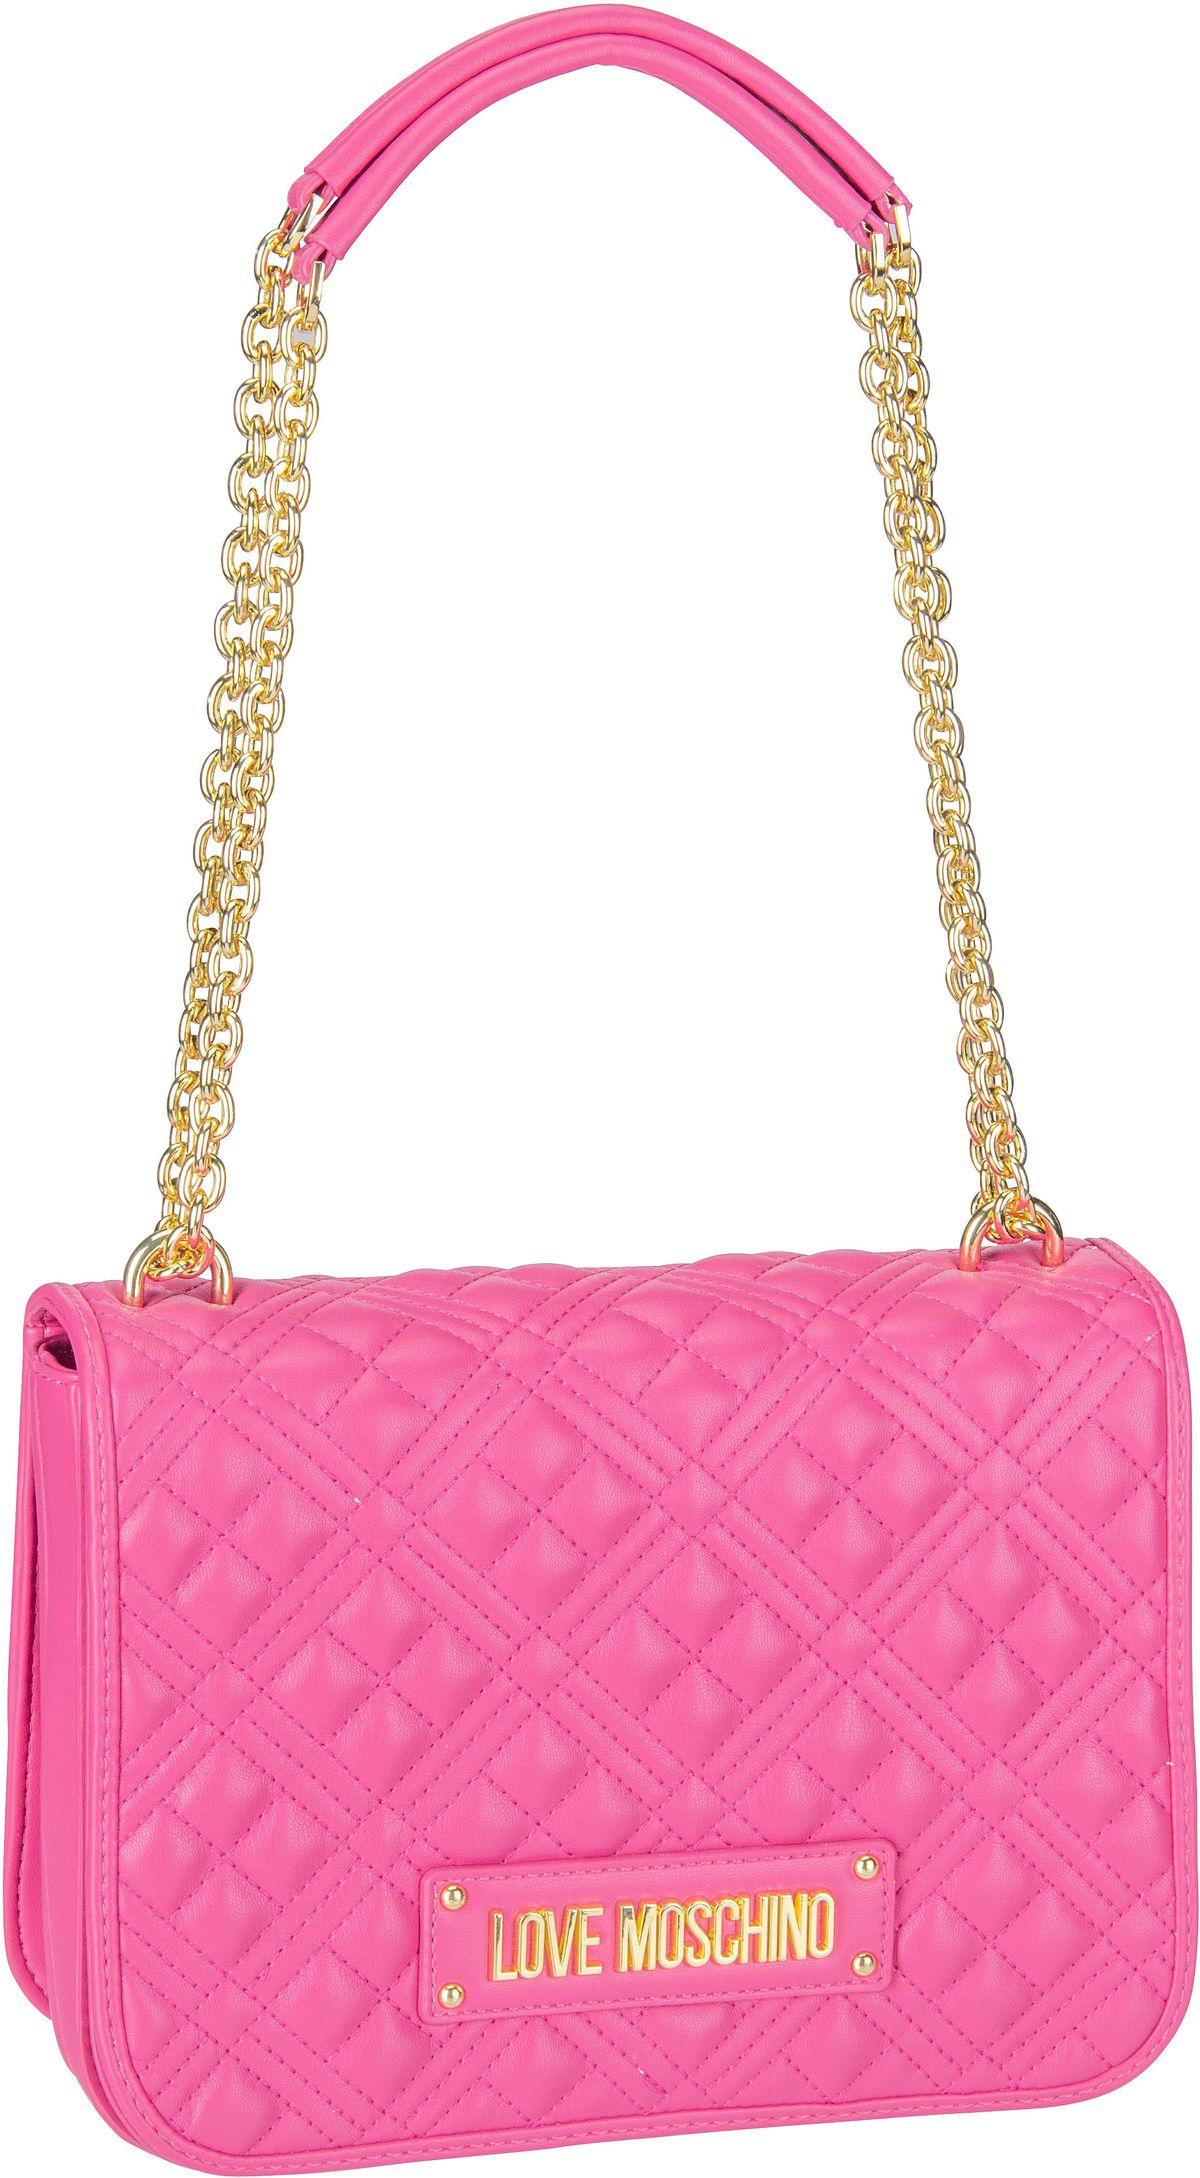 Love Moschino Quilted Bag 4000 - Fuchsia